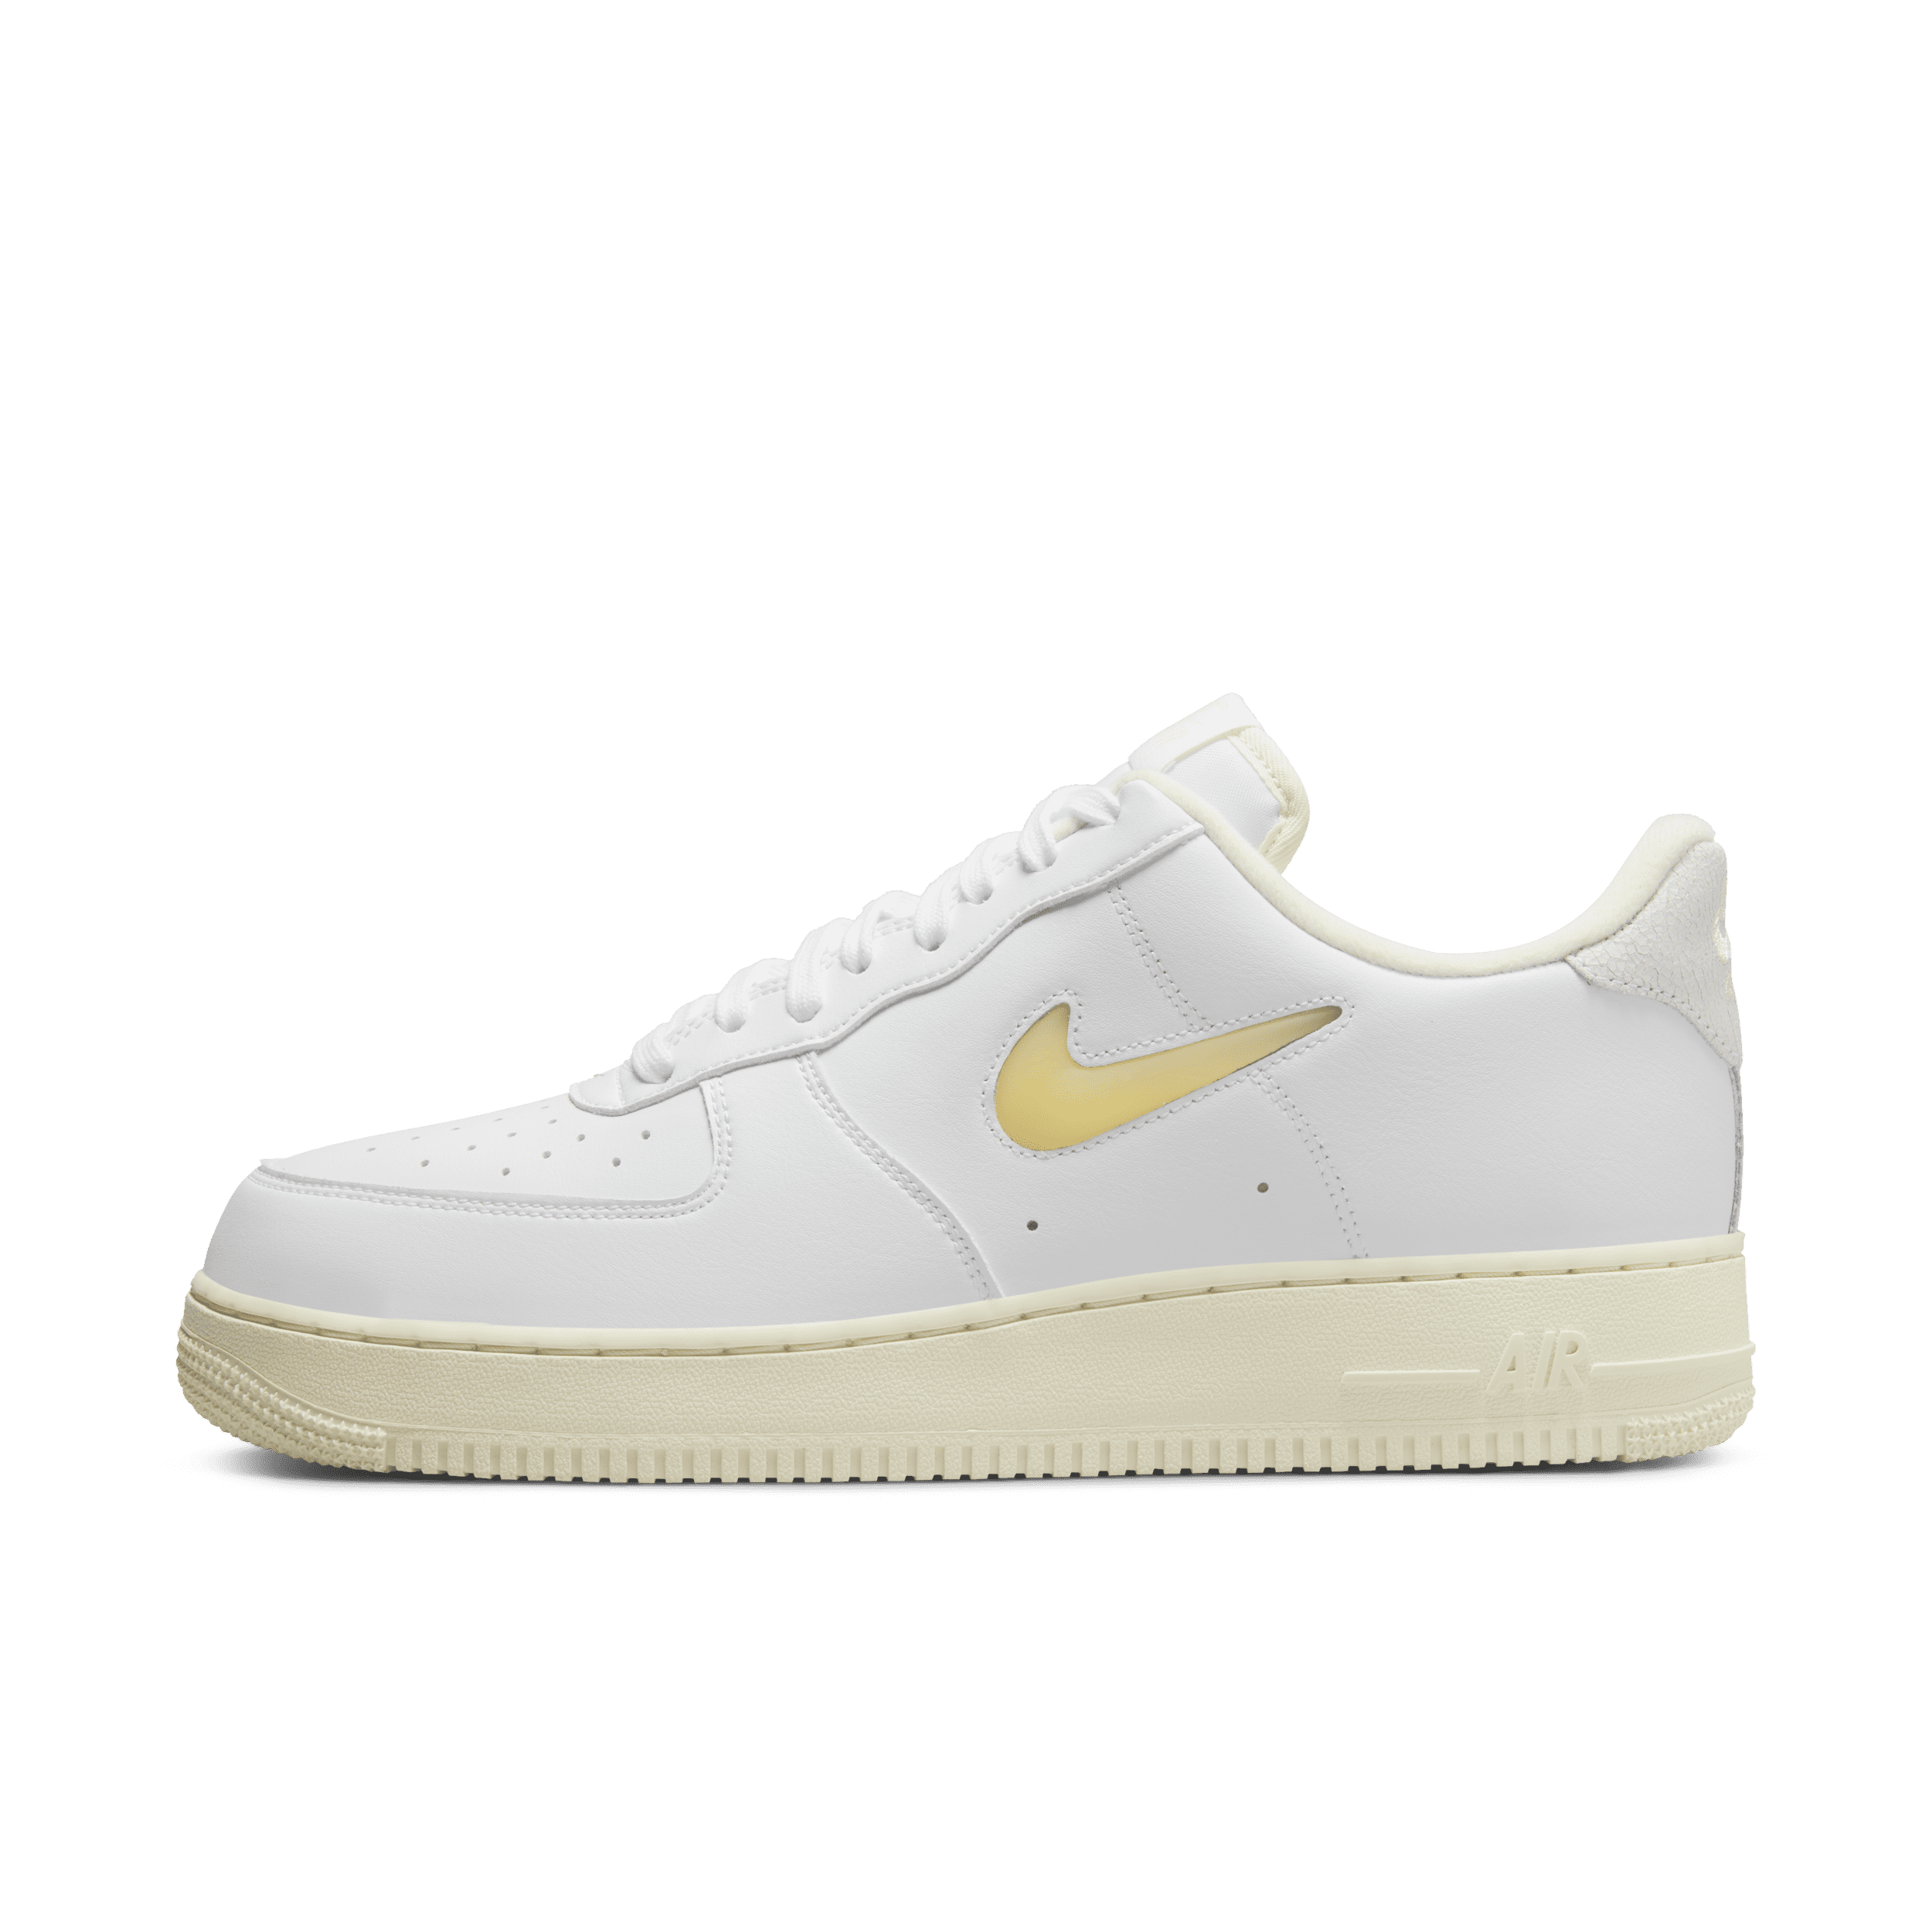 Nike Air Force 1 ’07 LX Herenschoen – Wit